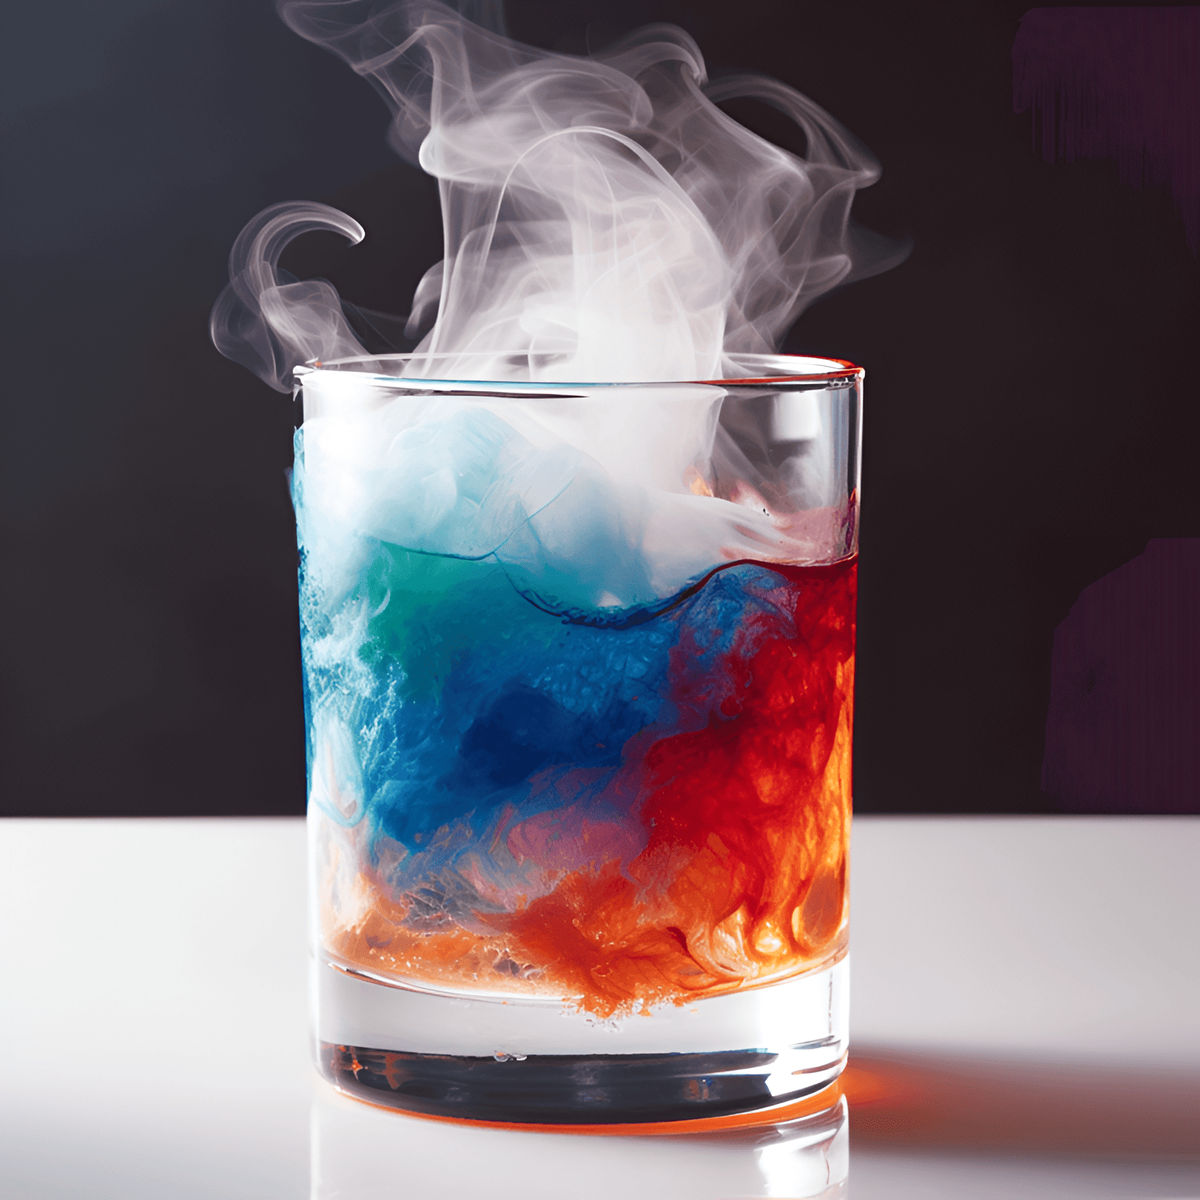 A SONG OF FIRE AND ICE SHOTS Drinks Mad in Crafts